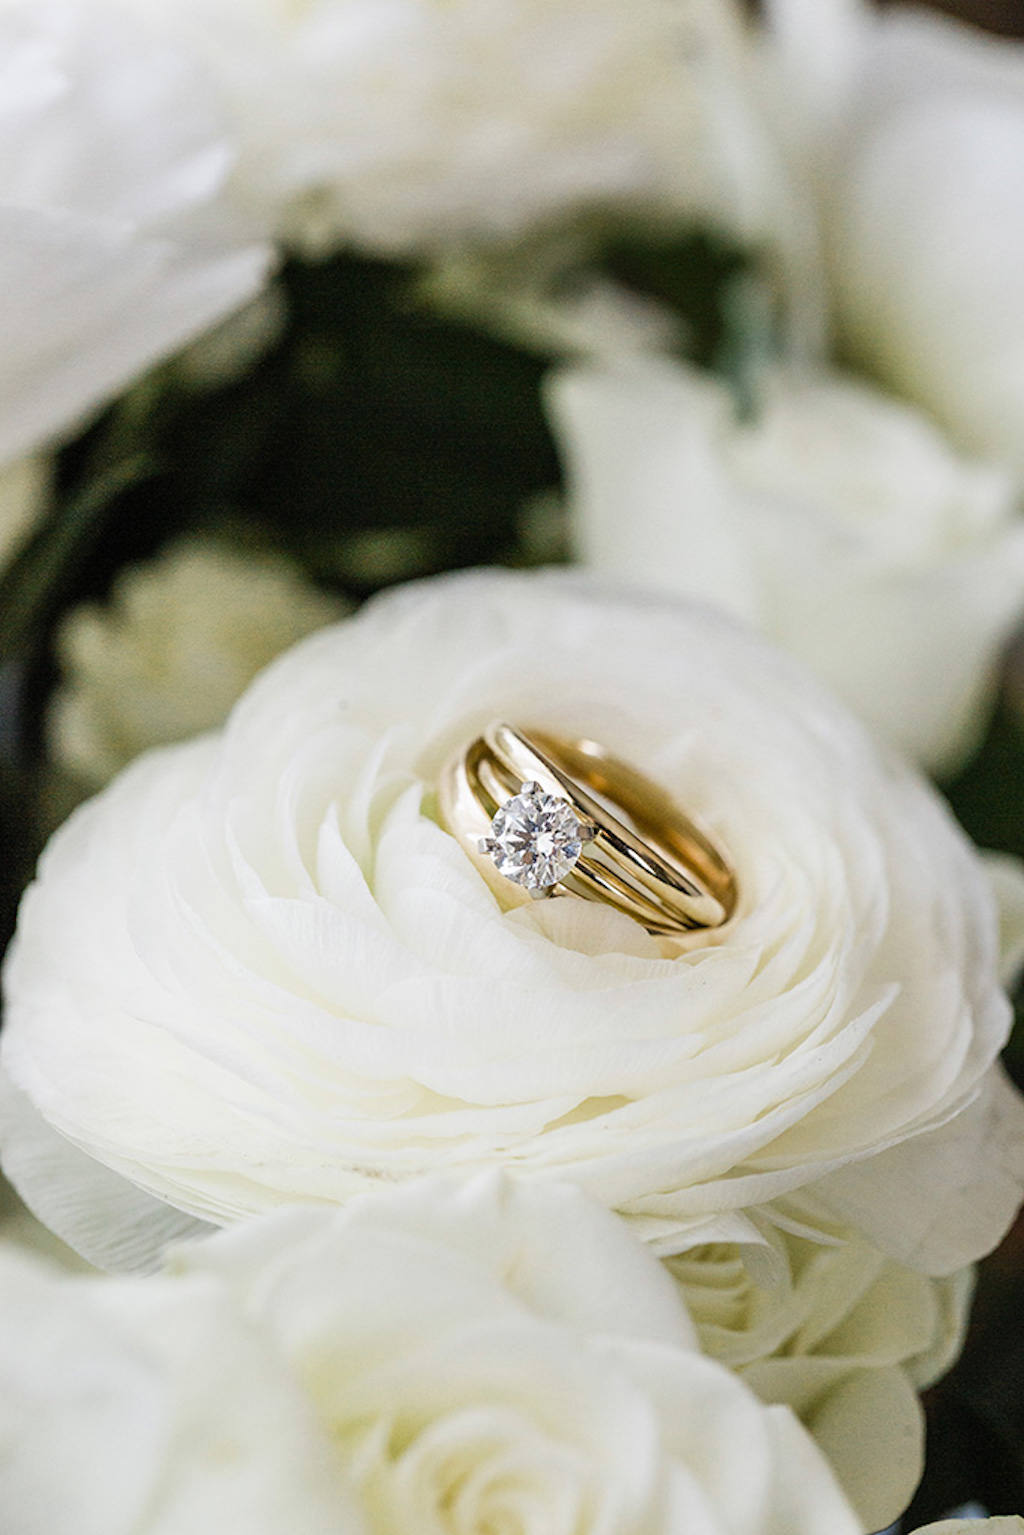 Elegant, Classic Solitaire Diamond Engagement Ring with Gold Bands, White Rose Background